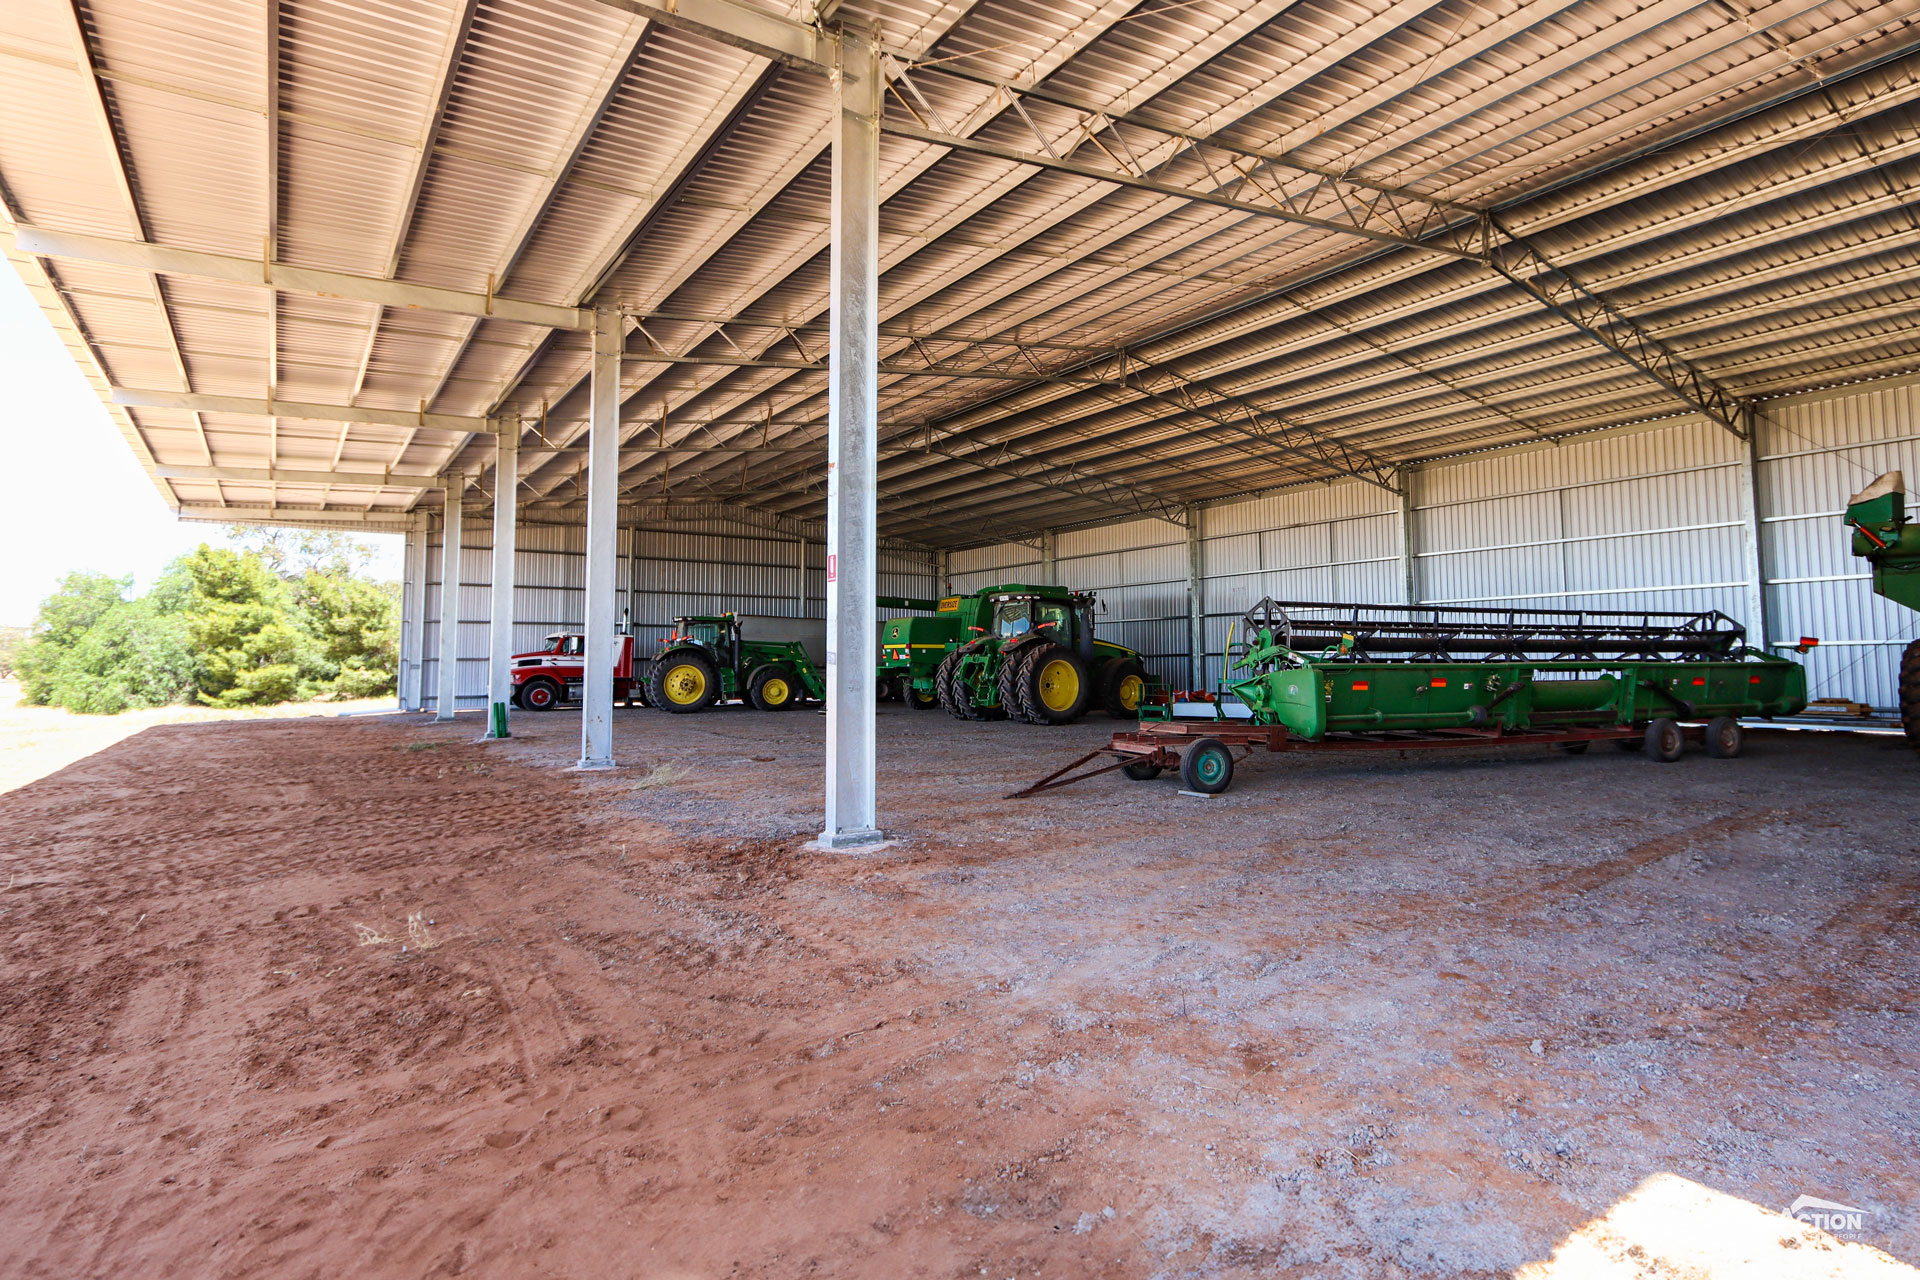 You are currently viewing 40m x 21m x 6.75m machinery shed with 6m canopy